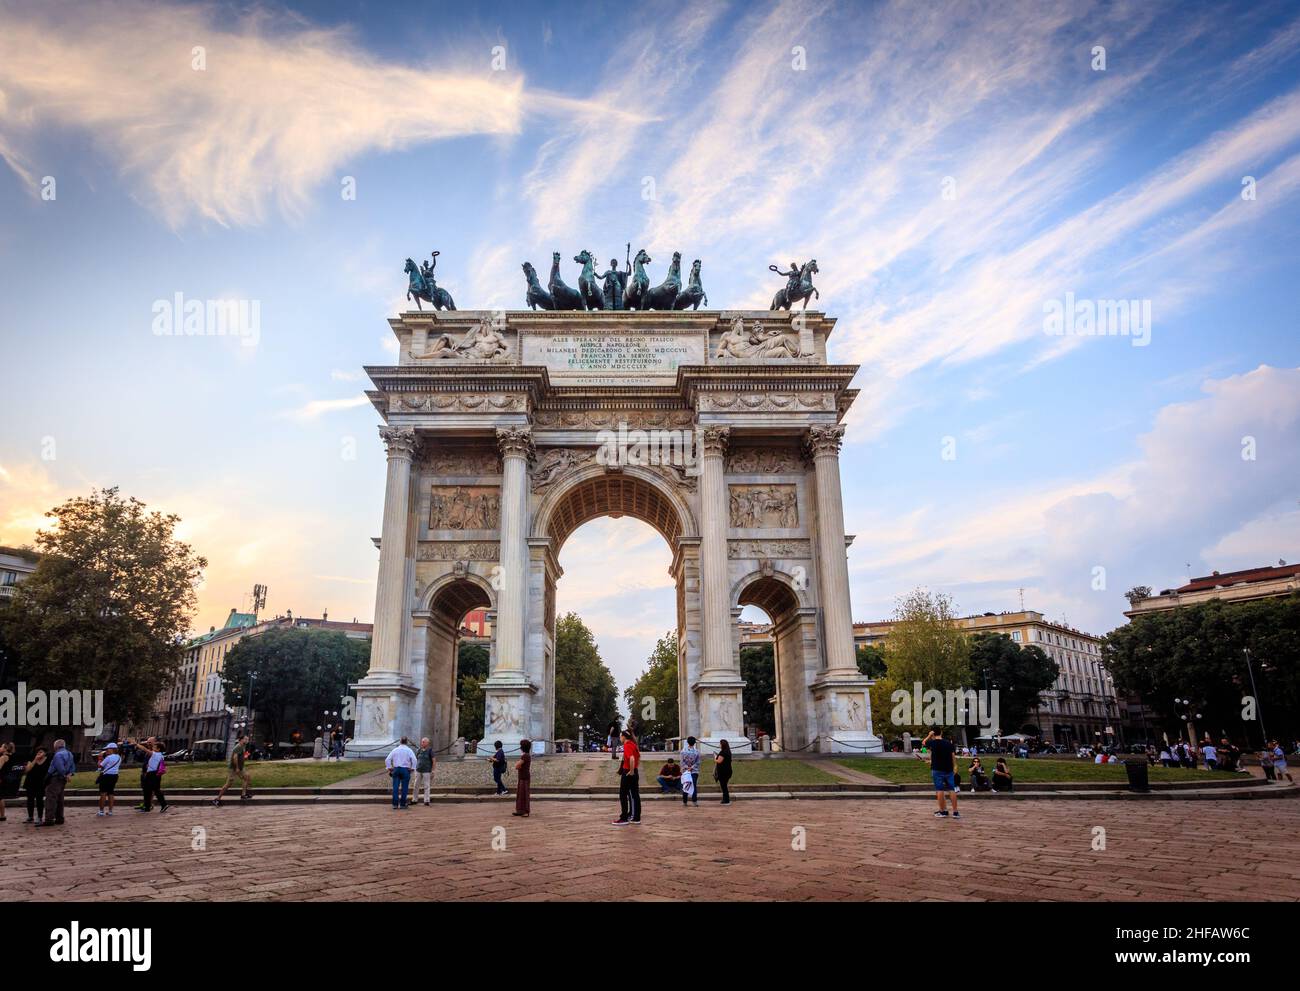 Porta Sempione, an Arch of Peace in Milan. The gate from the 19th century is called Arco della Pace, though its origins date back to the Roman wall. Stock Photo